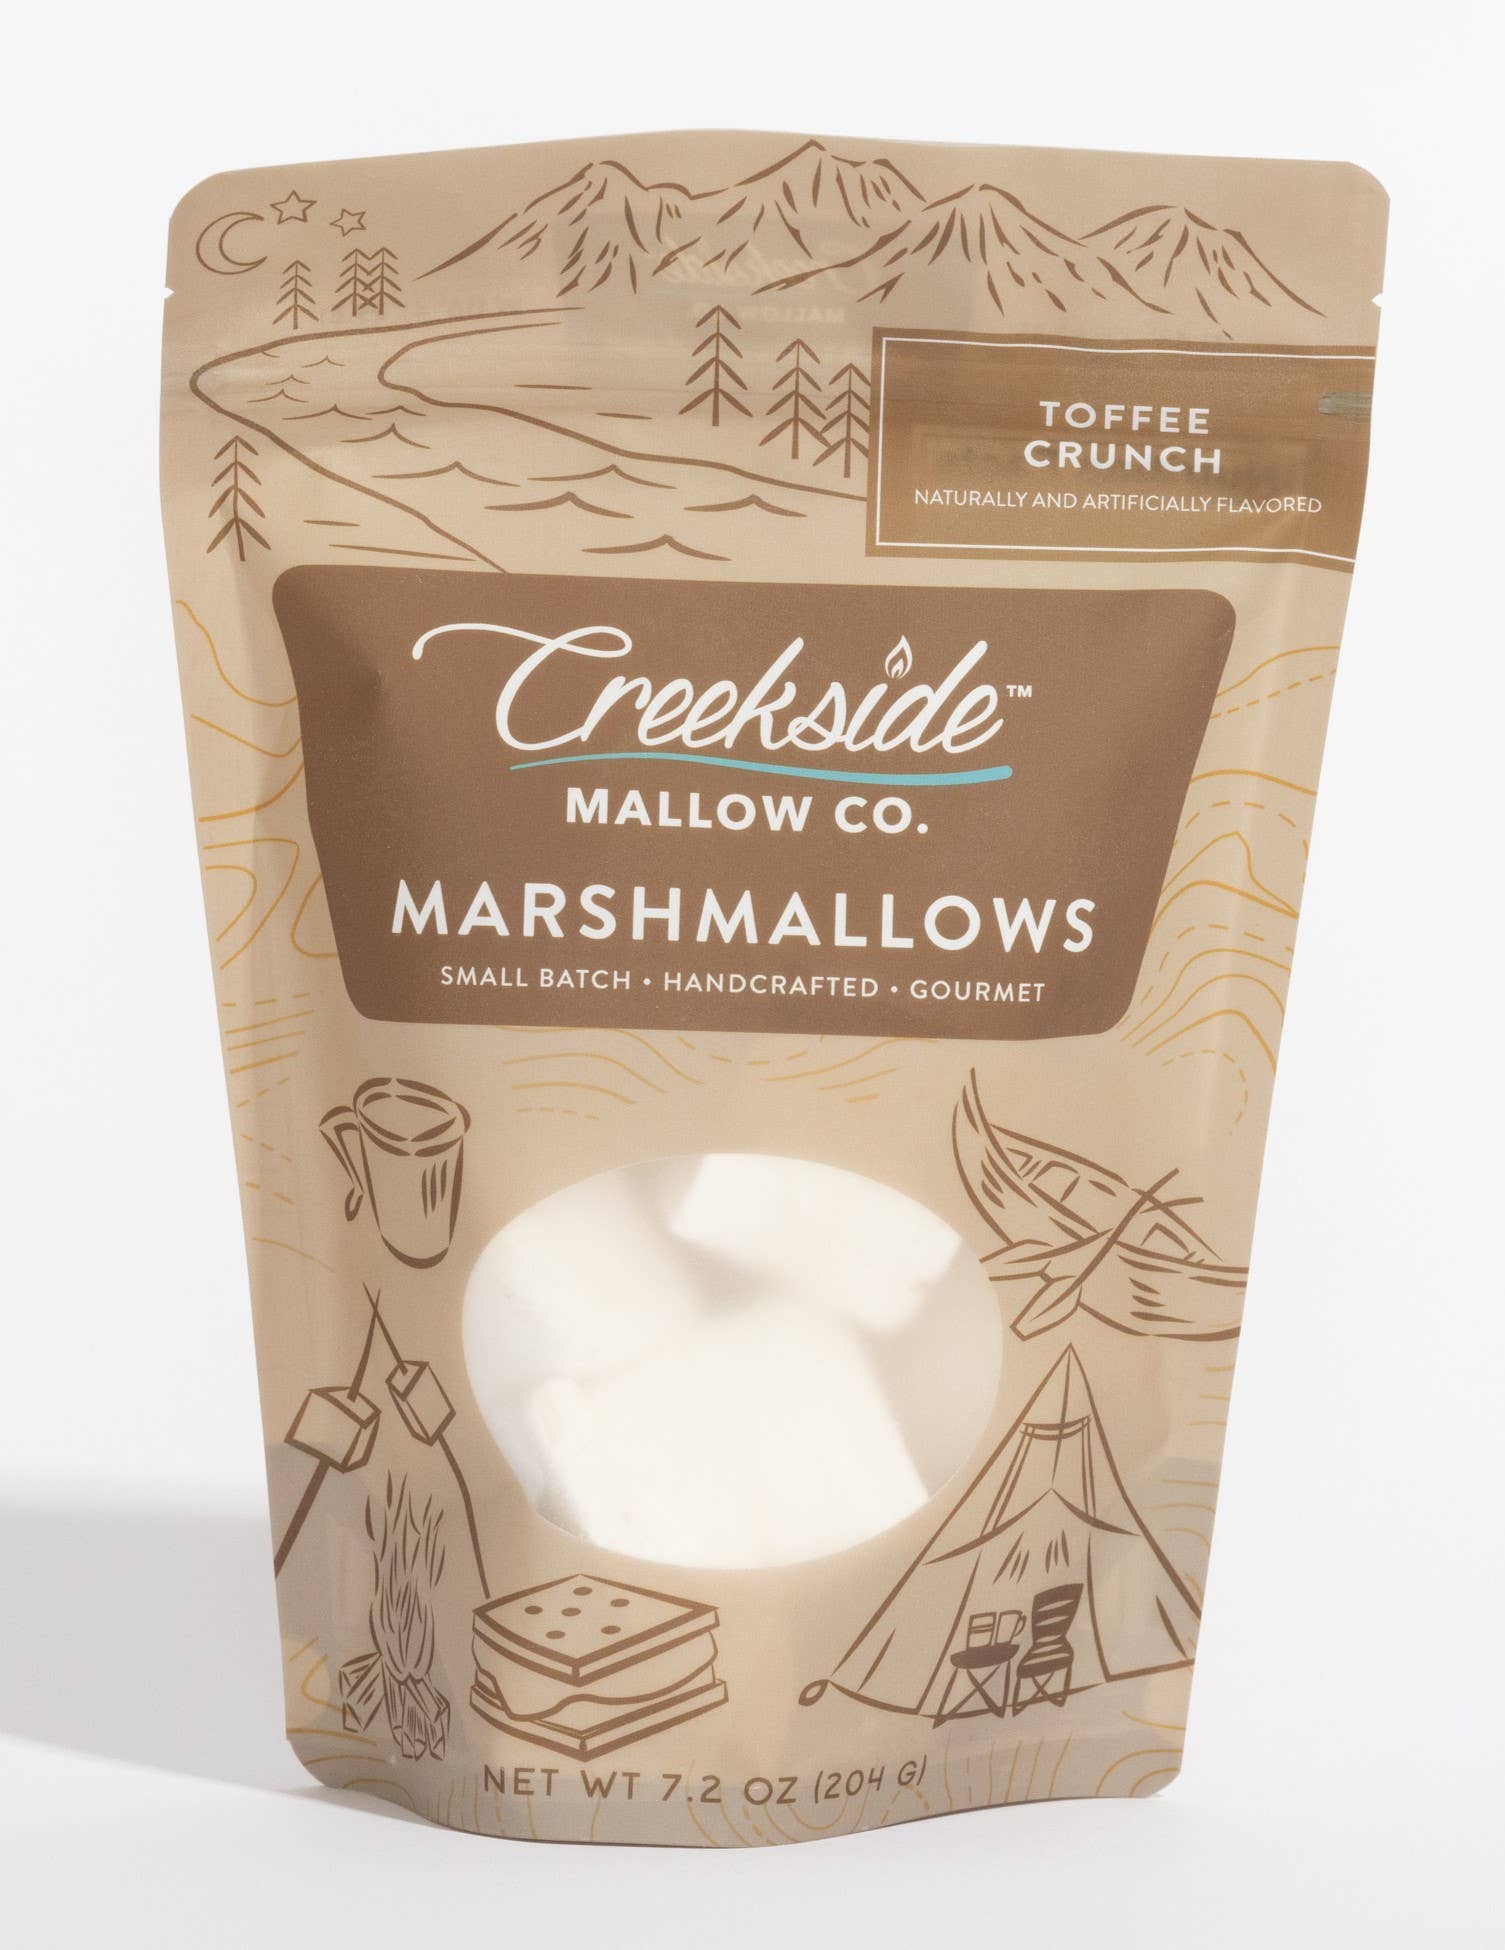 Creekside Marshmallow 12 Count